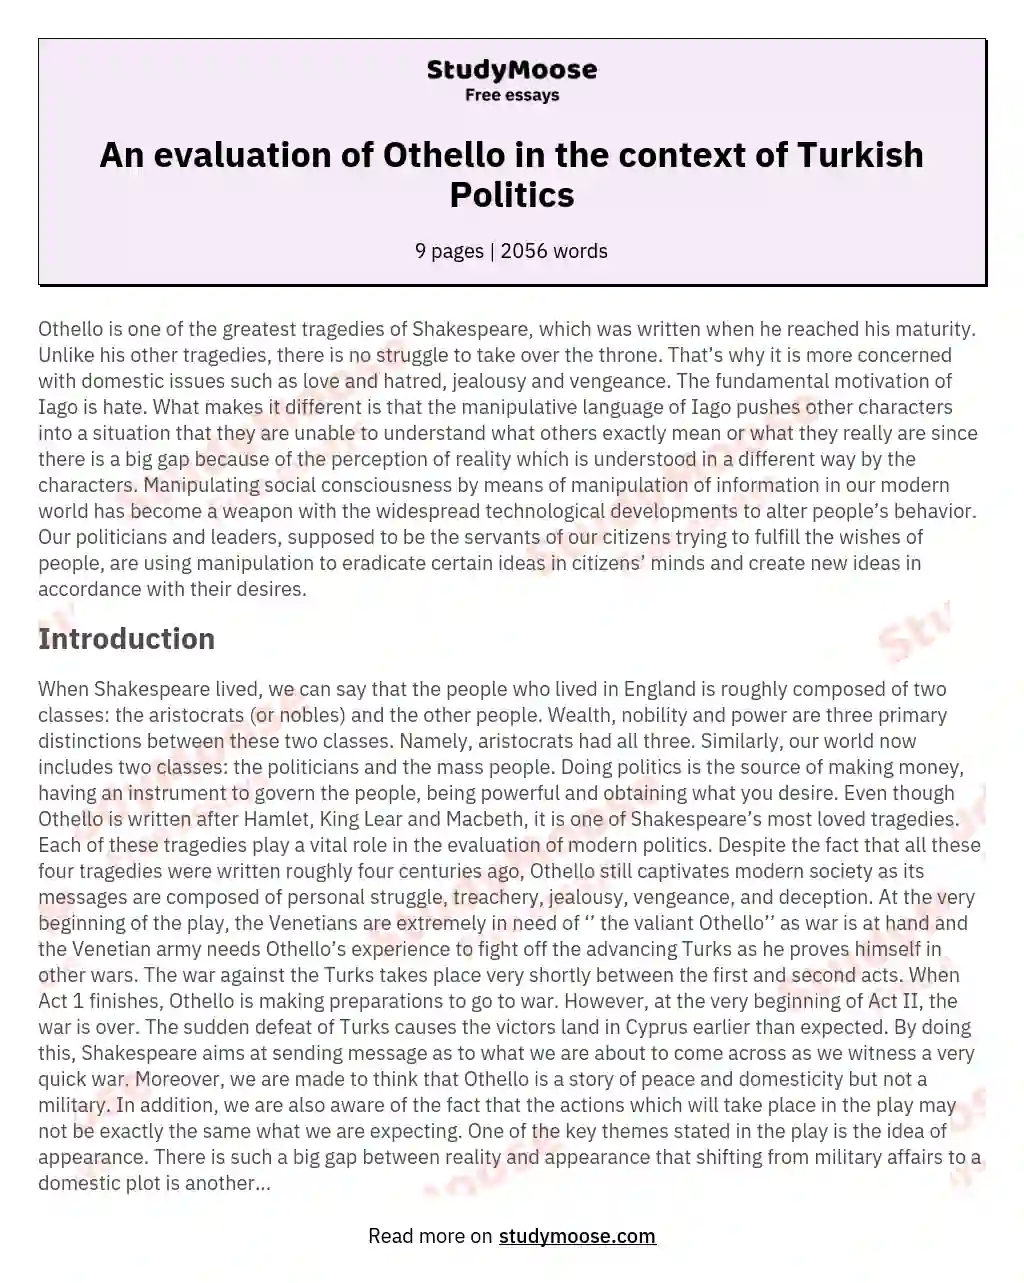 An evaluation of Othello in the context of Turkish Politics essay